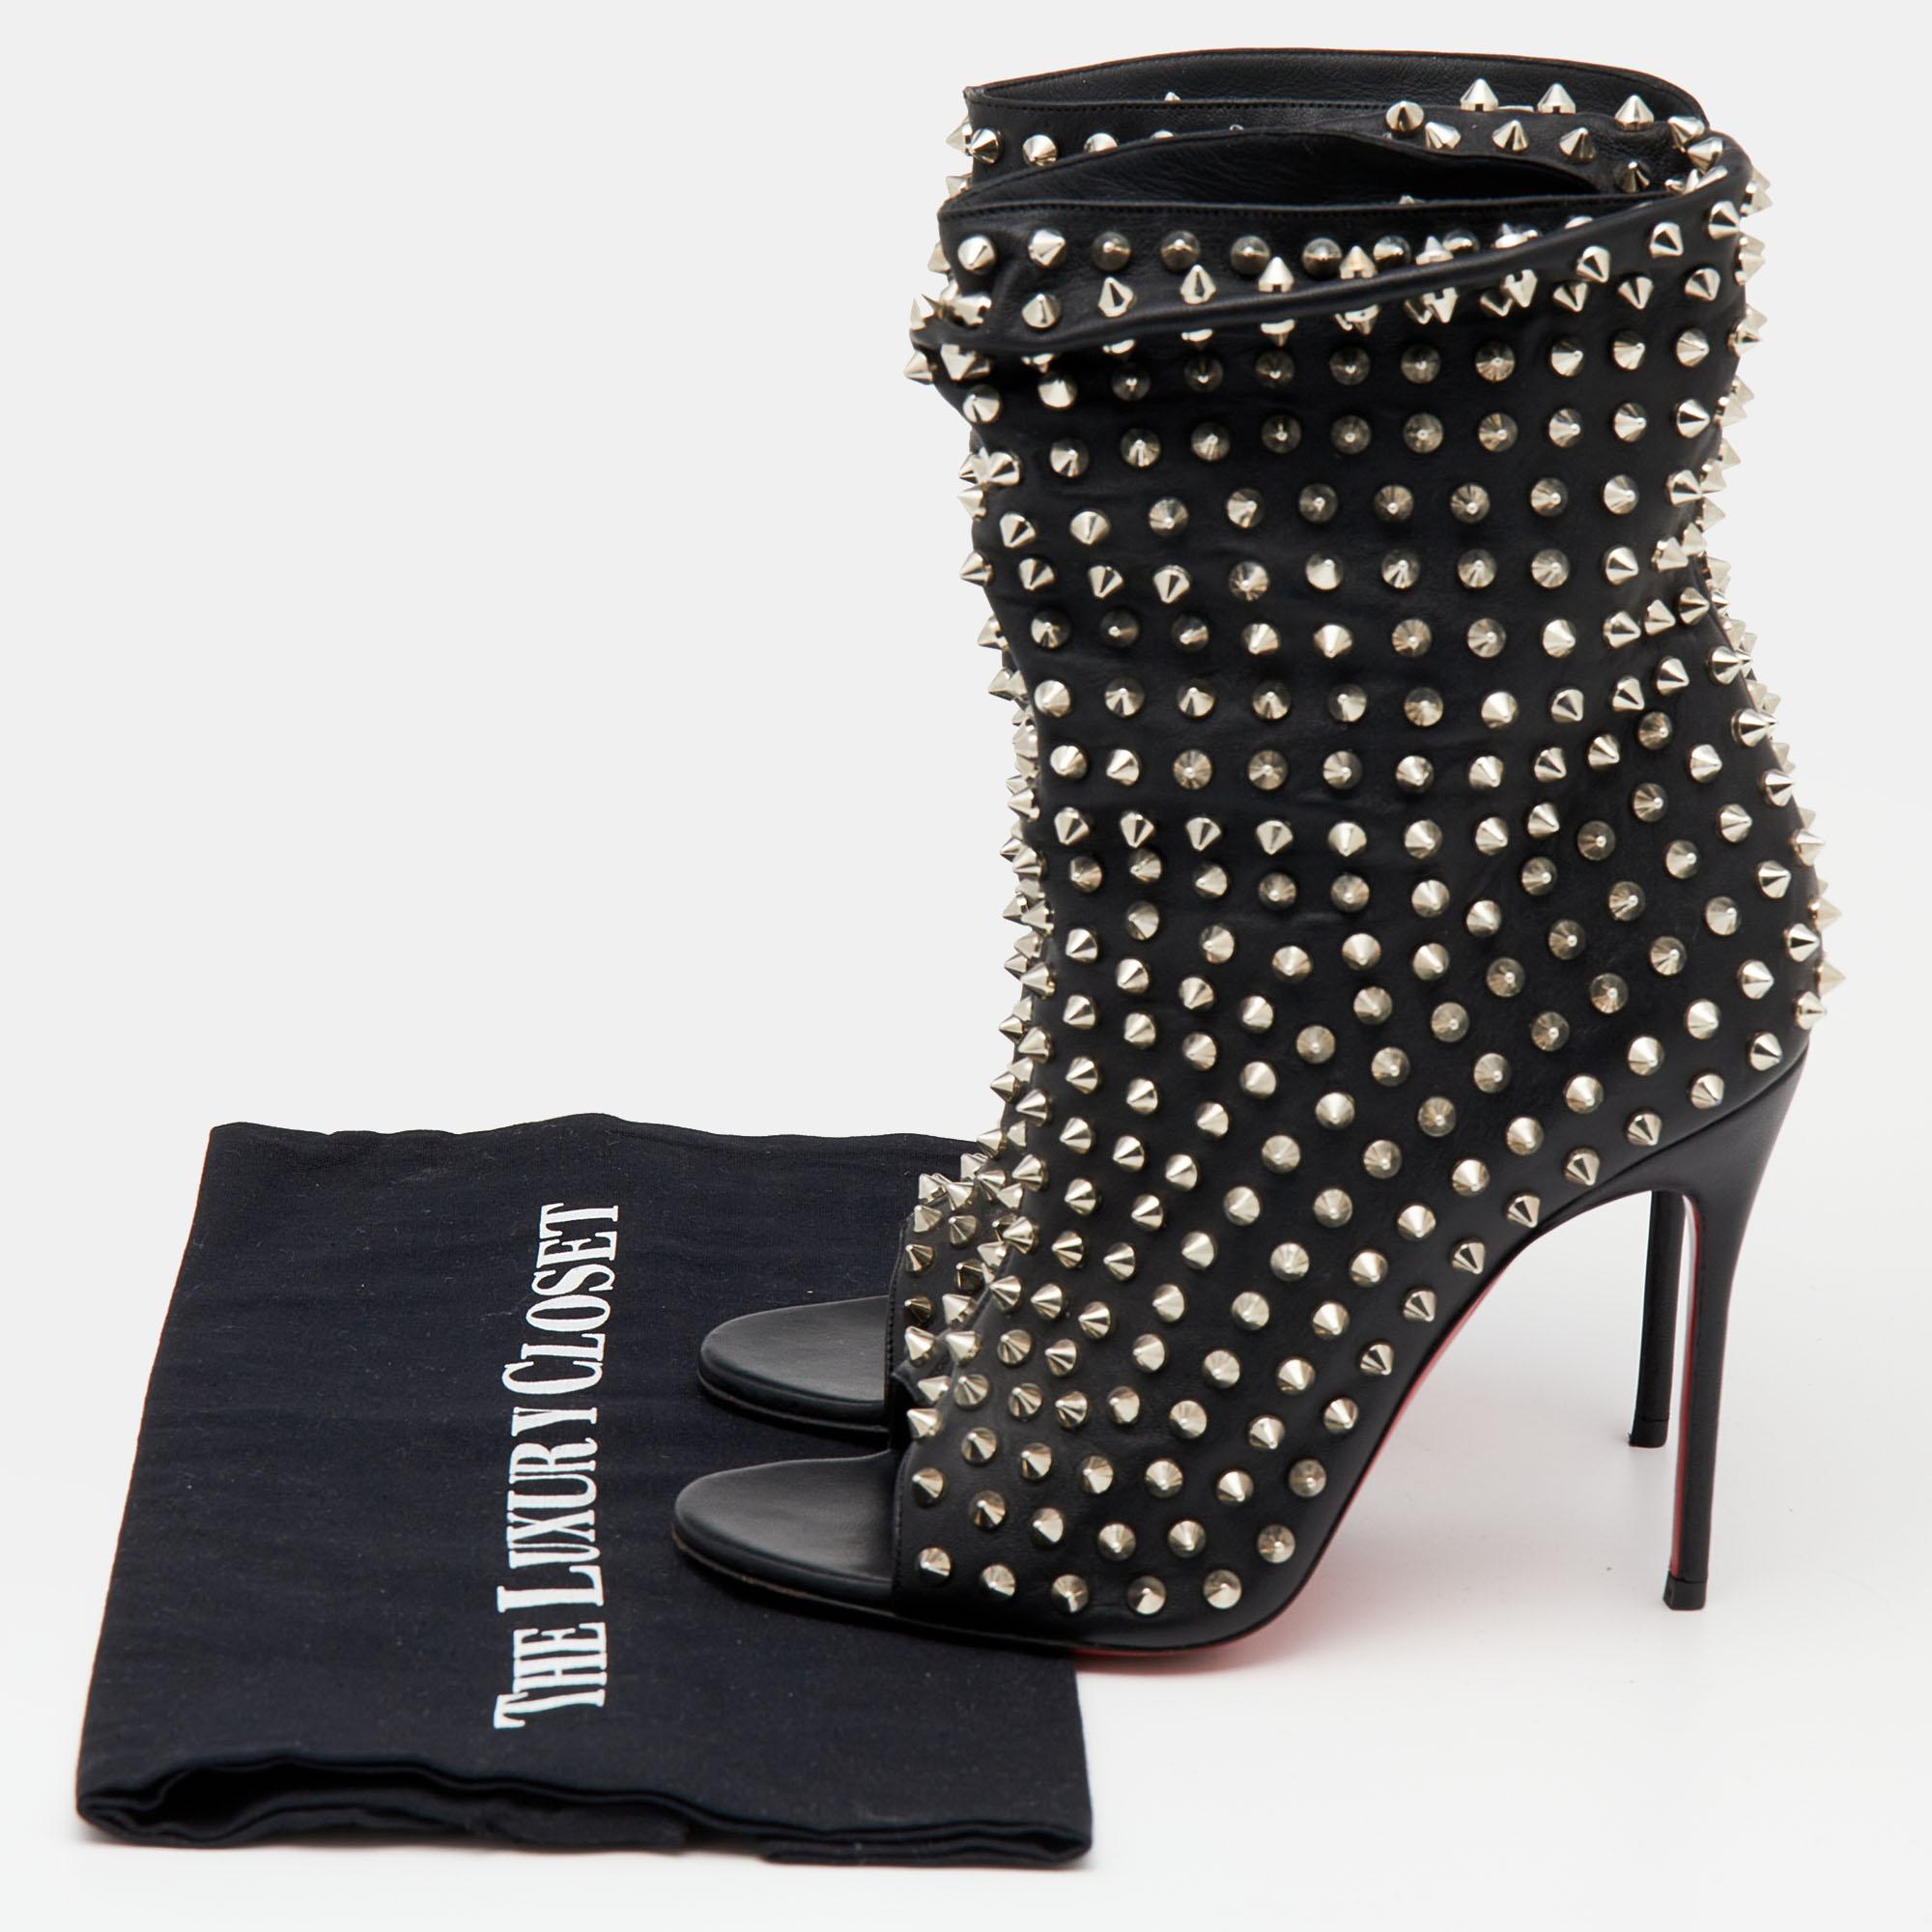 Women's Christian Louboutin Black Spiked Guerilla Peep Toe Slouchy Ankle Boots Size 37.5